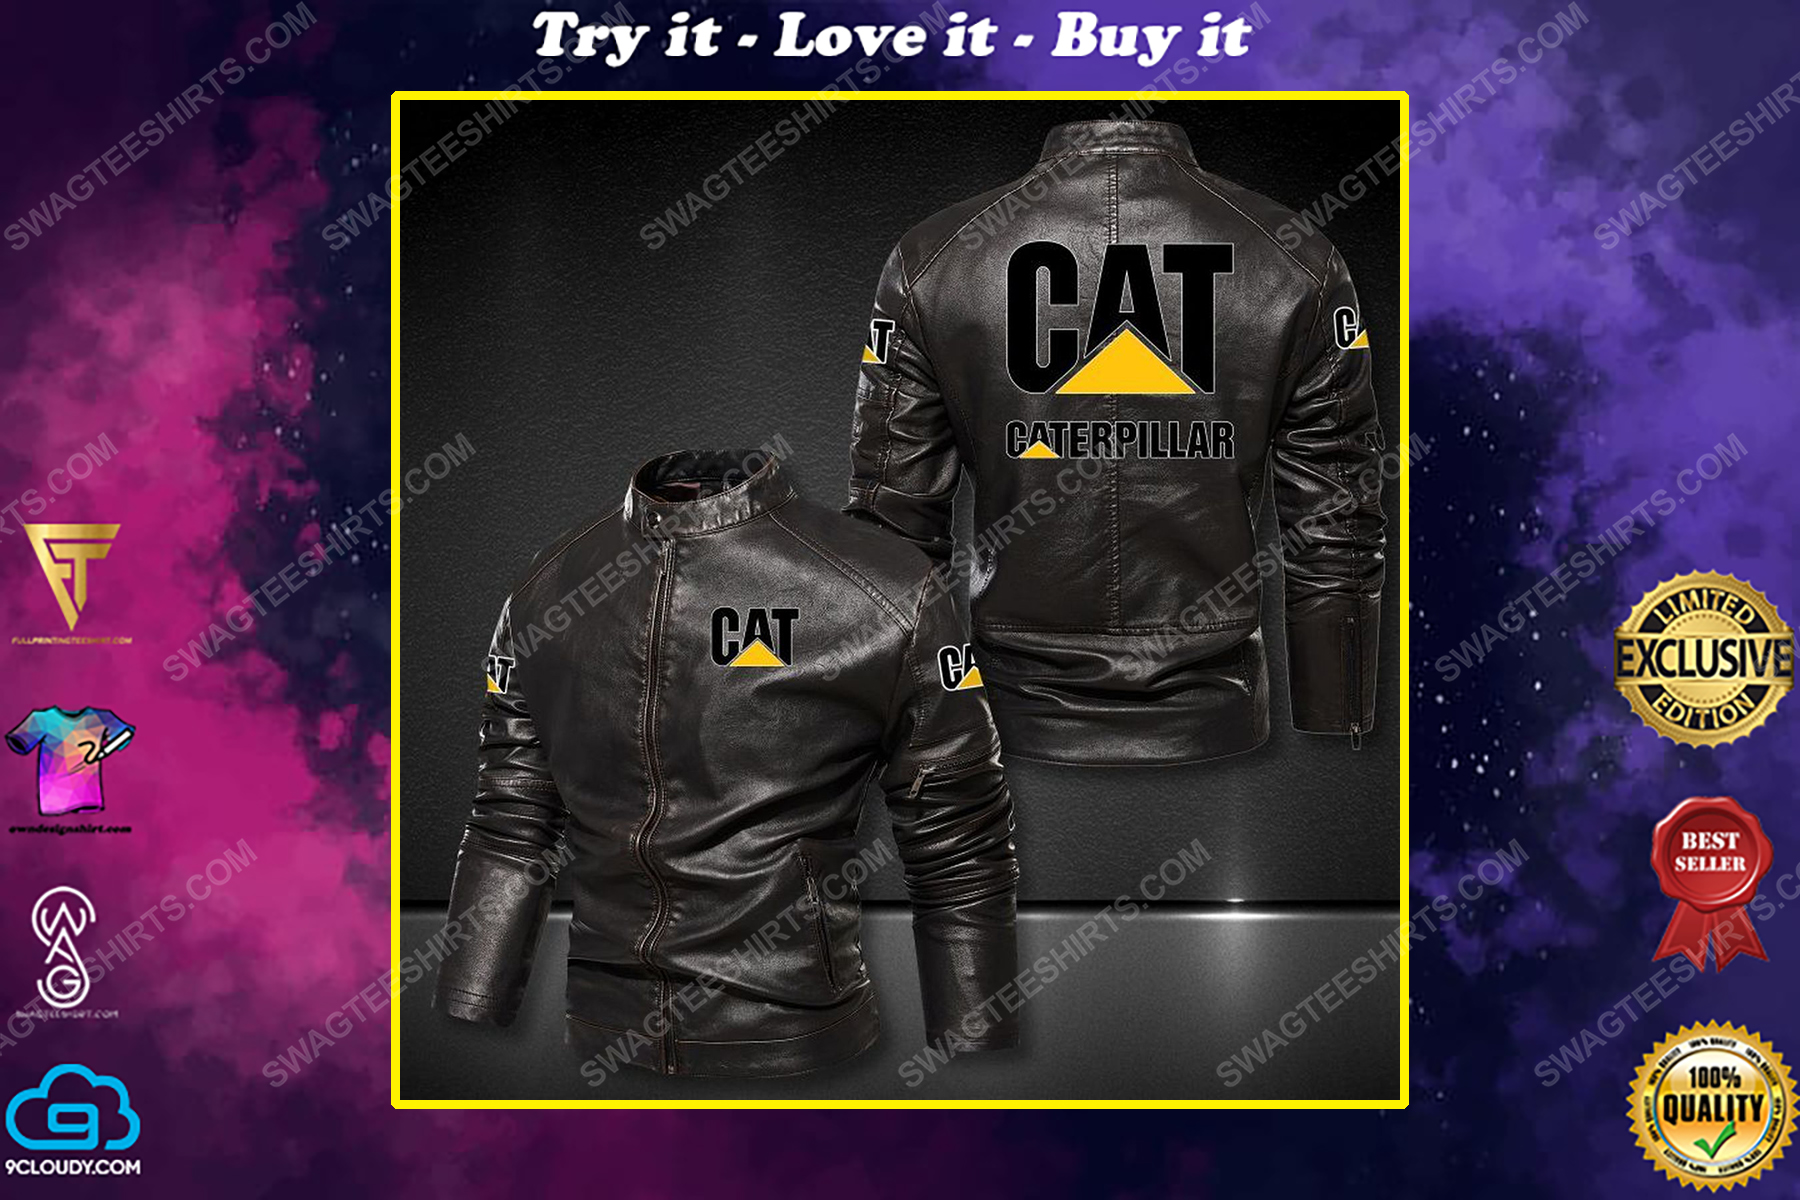 The caterpillar inc company sports leather jacket